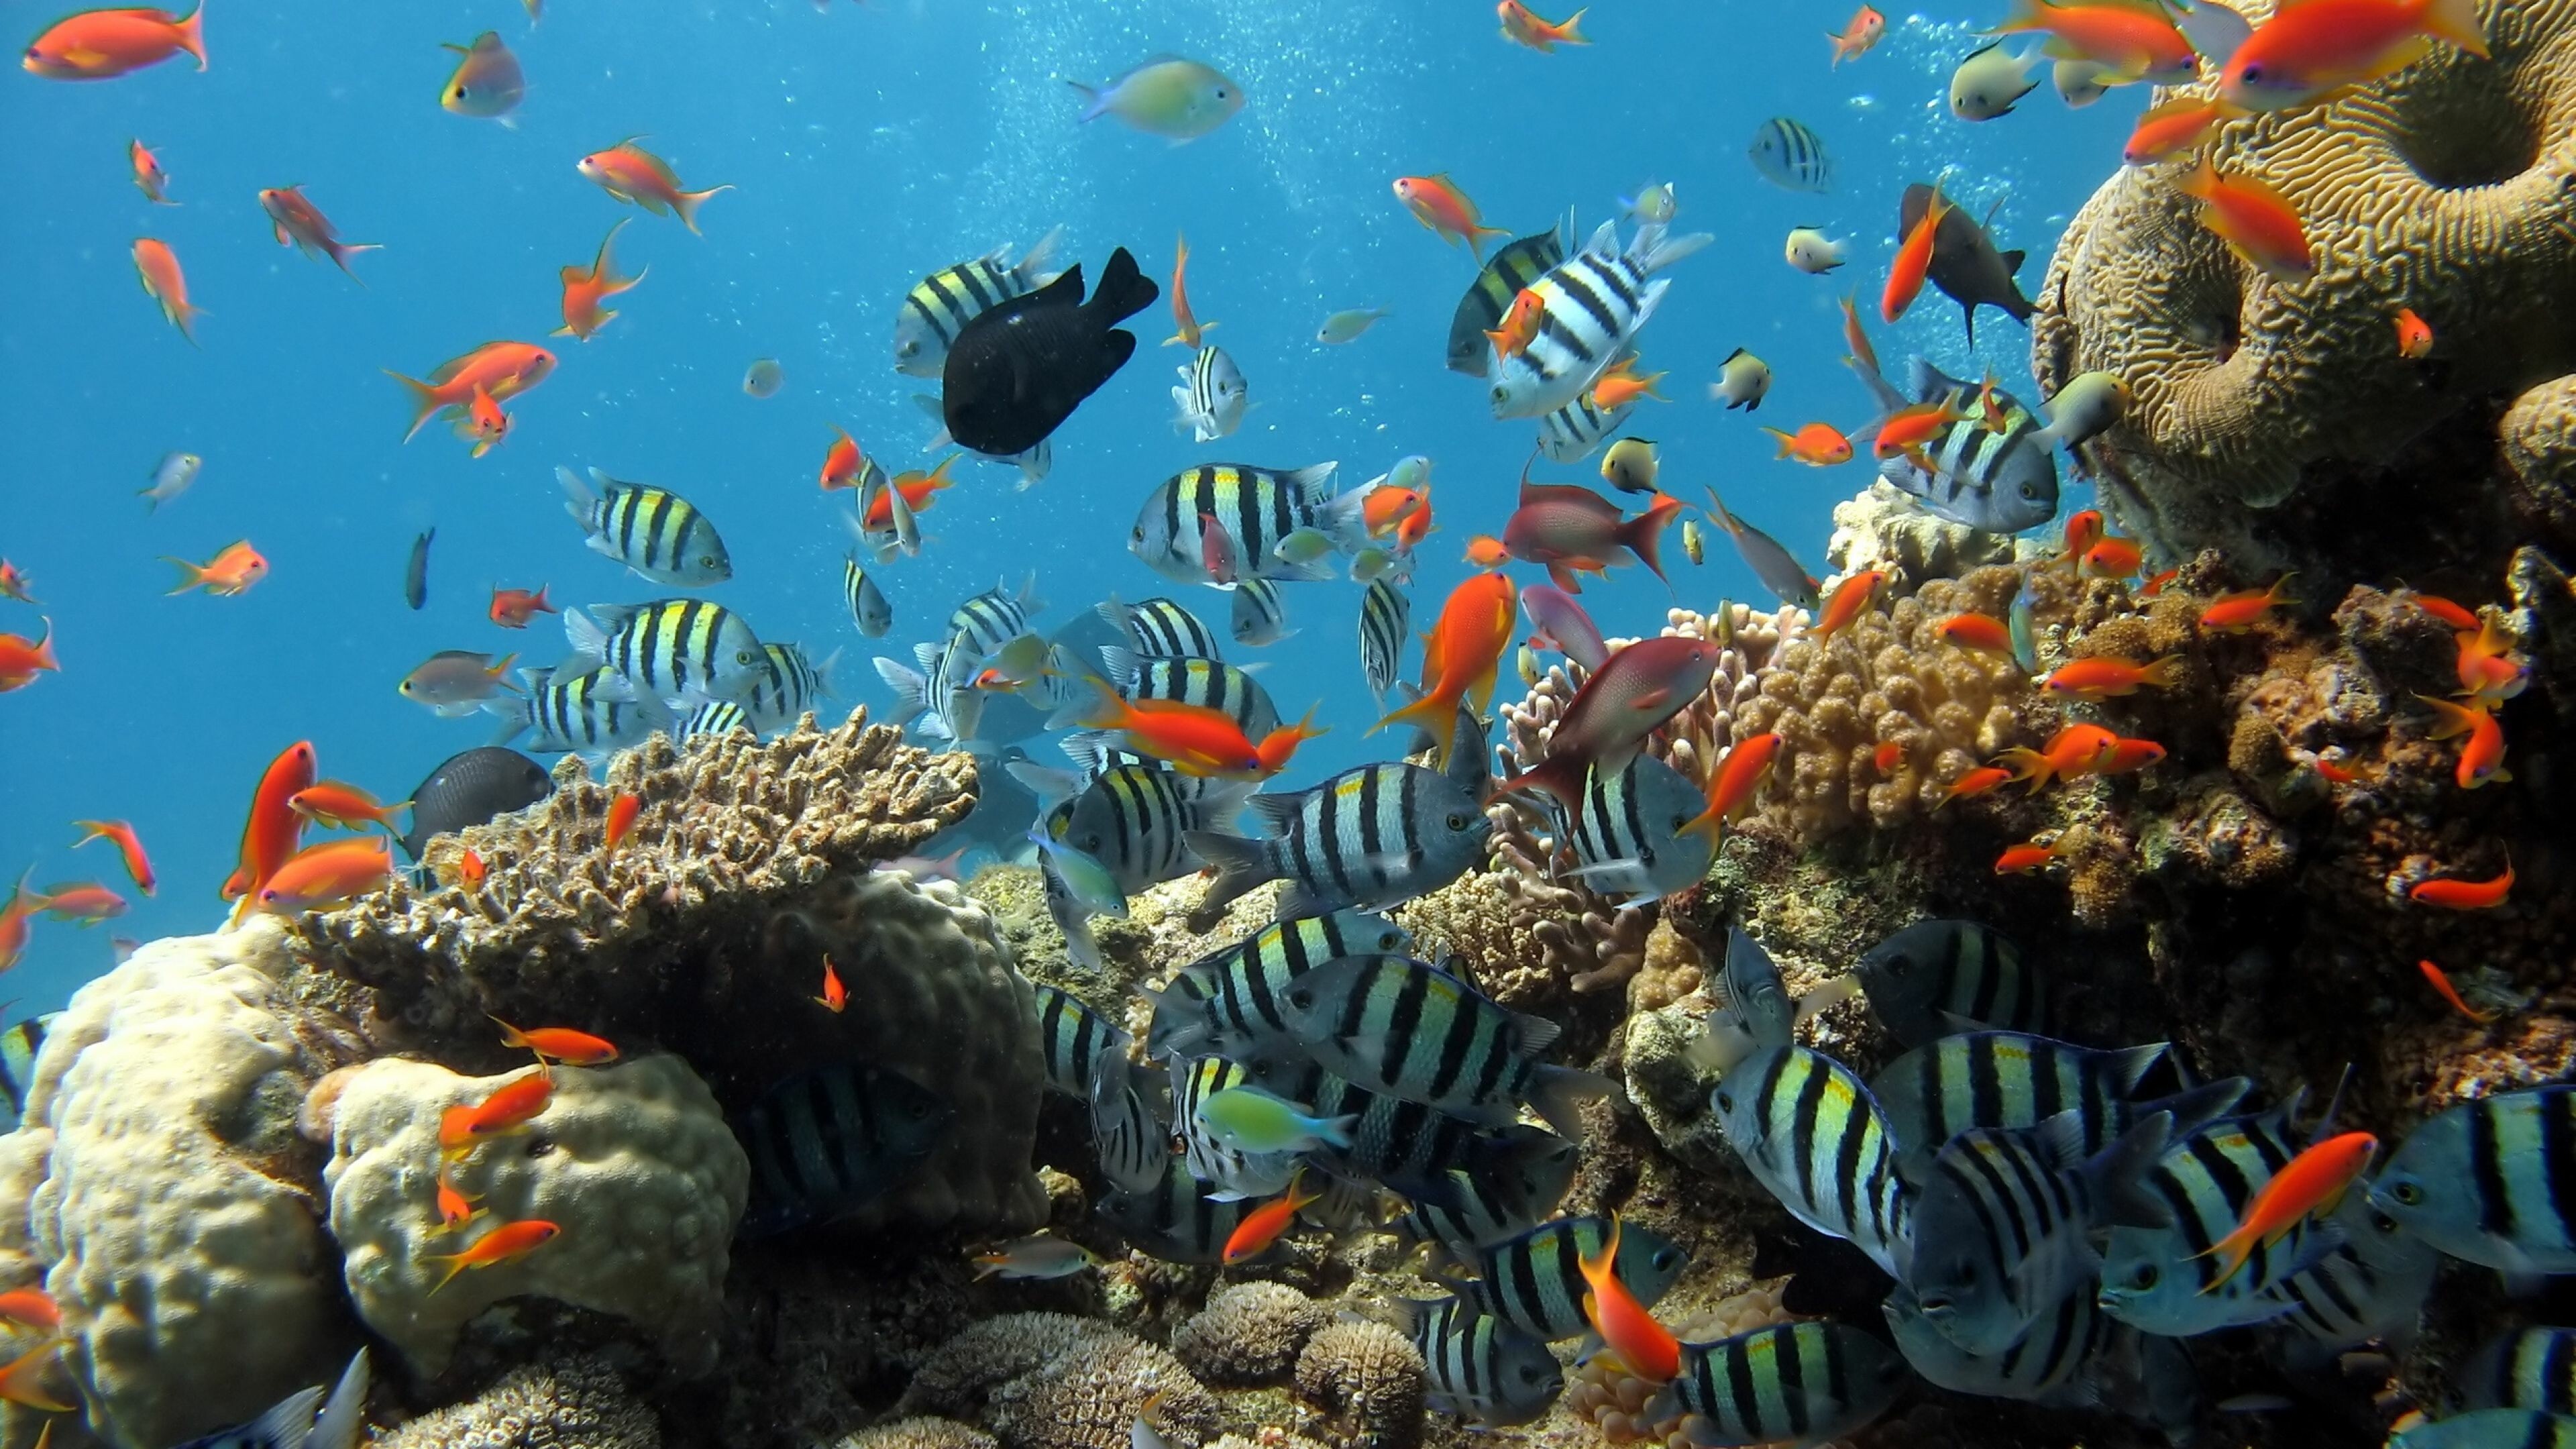 Coral Reef: They occupy less than 0.1% of the world's ocean area, about half the area of France, yet they provide a home for at least 25% of all marine species, including fish, mollusks, worms, crustaceans, echinoderms, sponges, tunicates and other cnidarians. 3840x2160 4K Background.